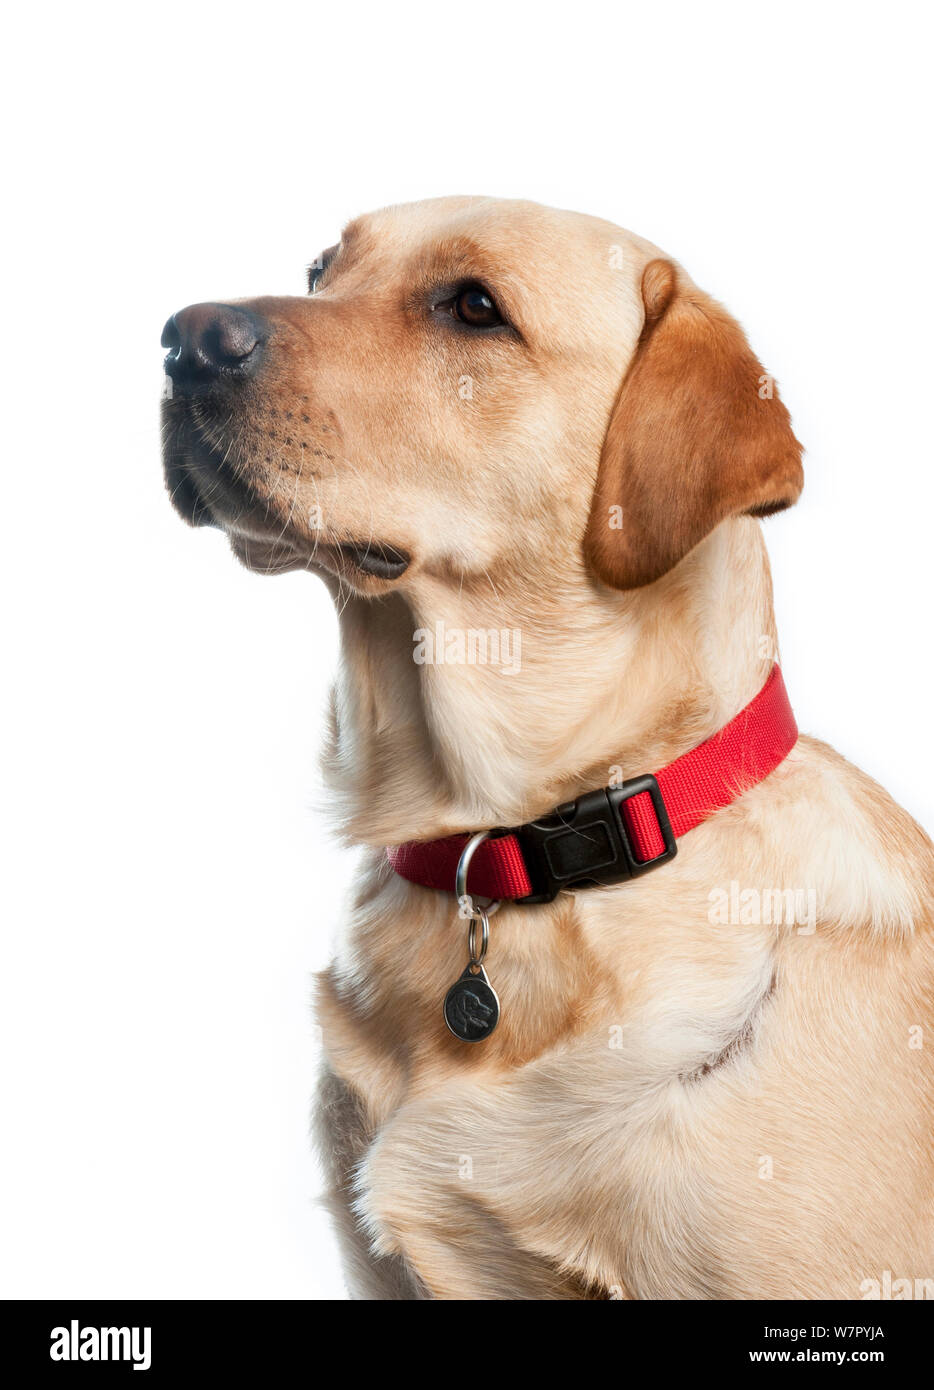 Labrador with red collar, against white background. Stock Photo